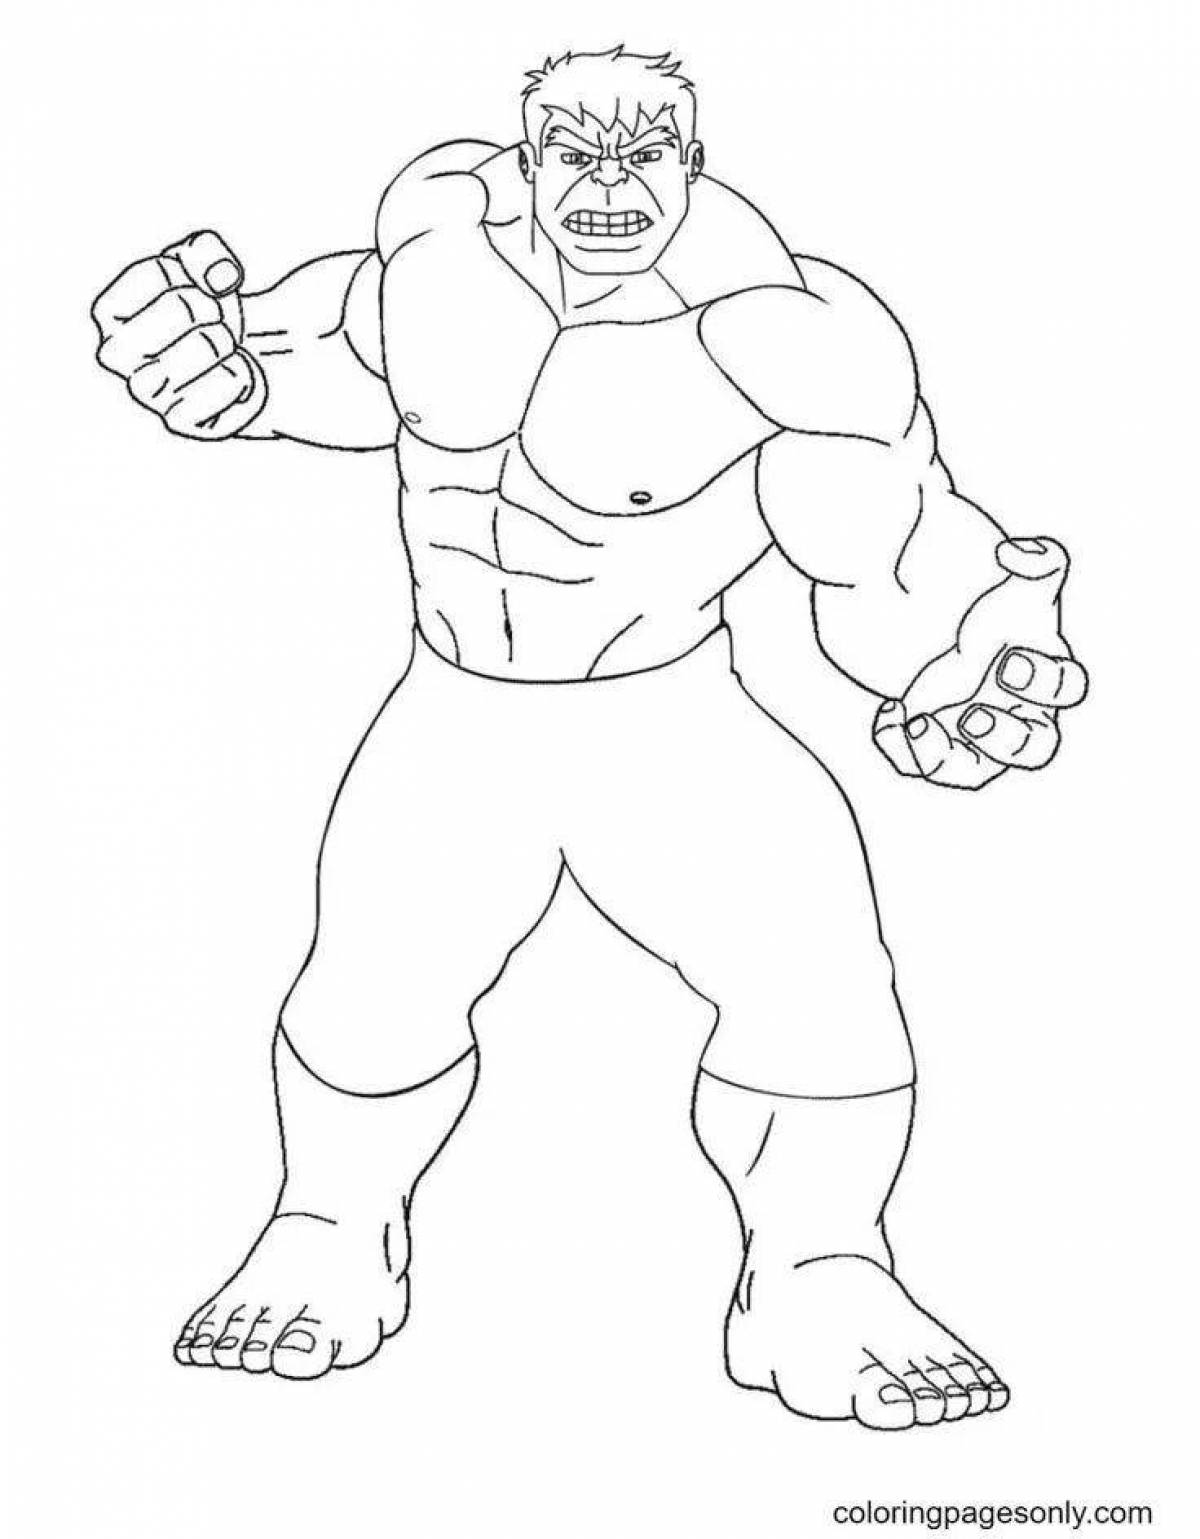 Hulk for kids 6 7 years old #5